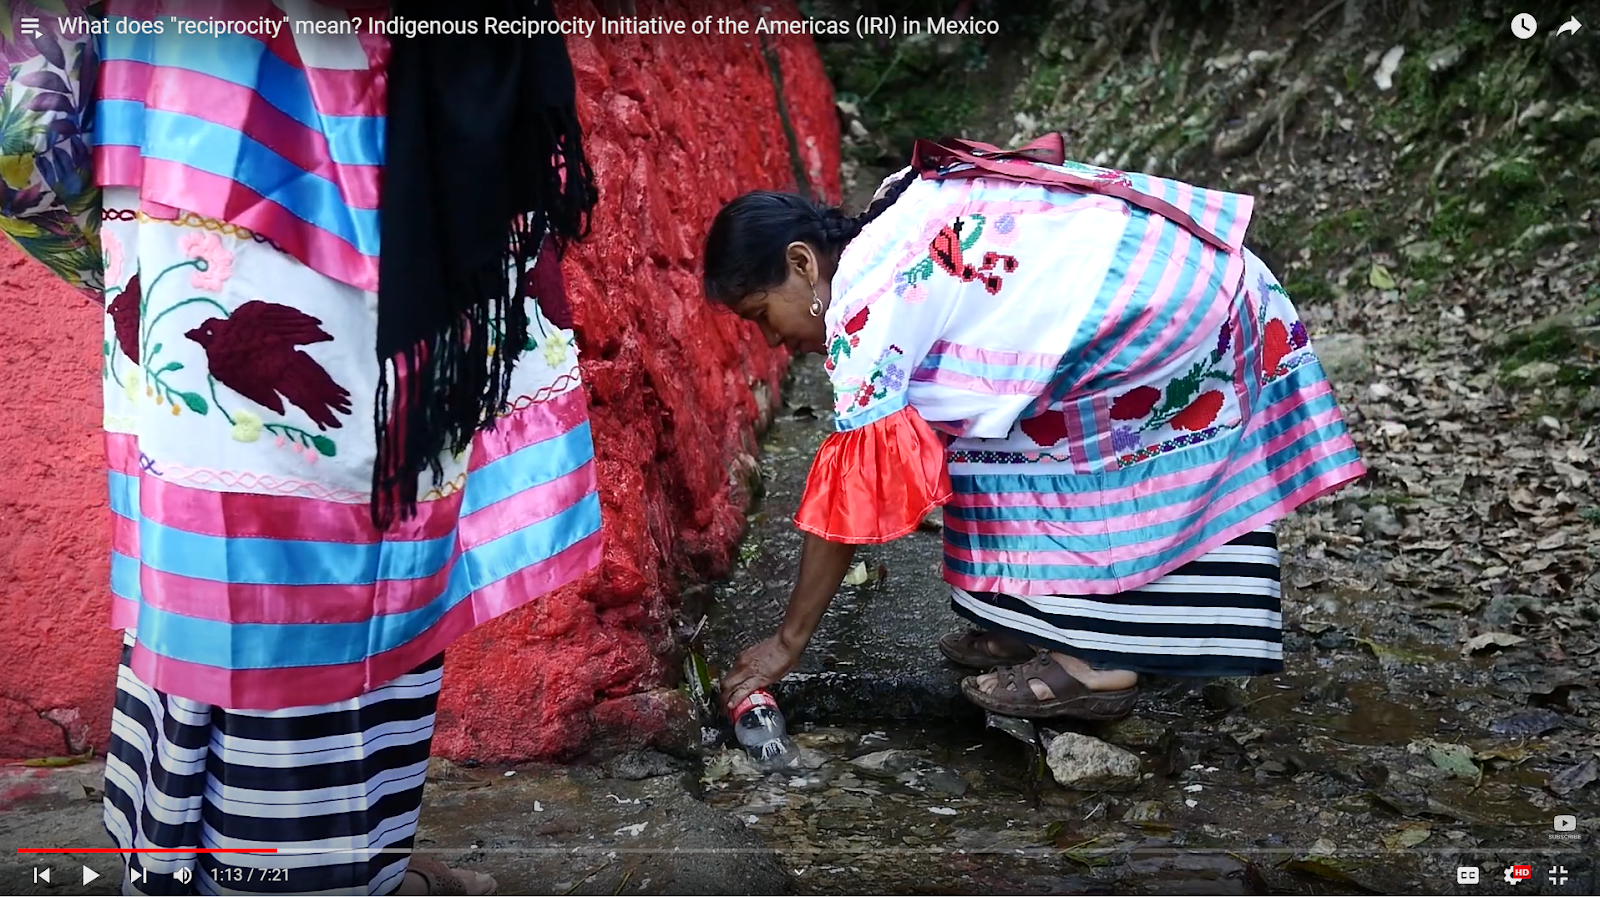 A middle-aged Indigenous woman in traditional Mazatec dress, with blue and purple strips and intricate embroidery depicting birds and flowers, stoops to gather water from a spring using an empty Coke bottle.